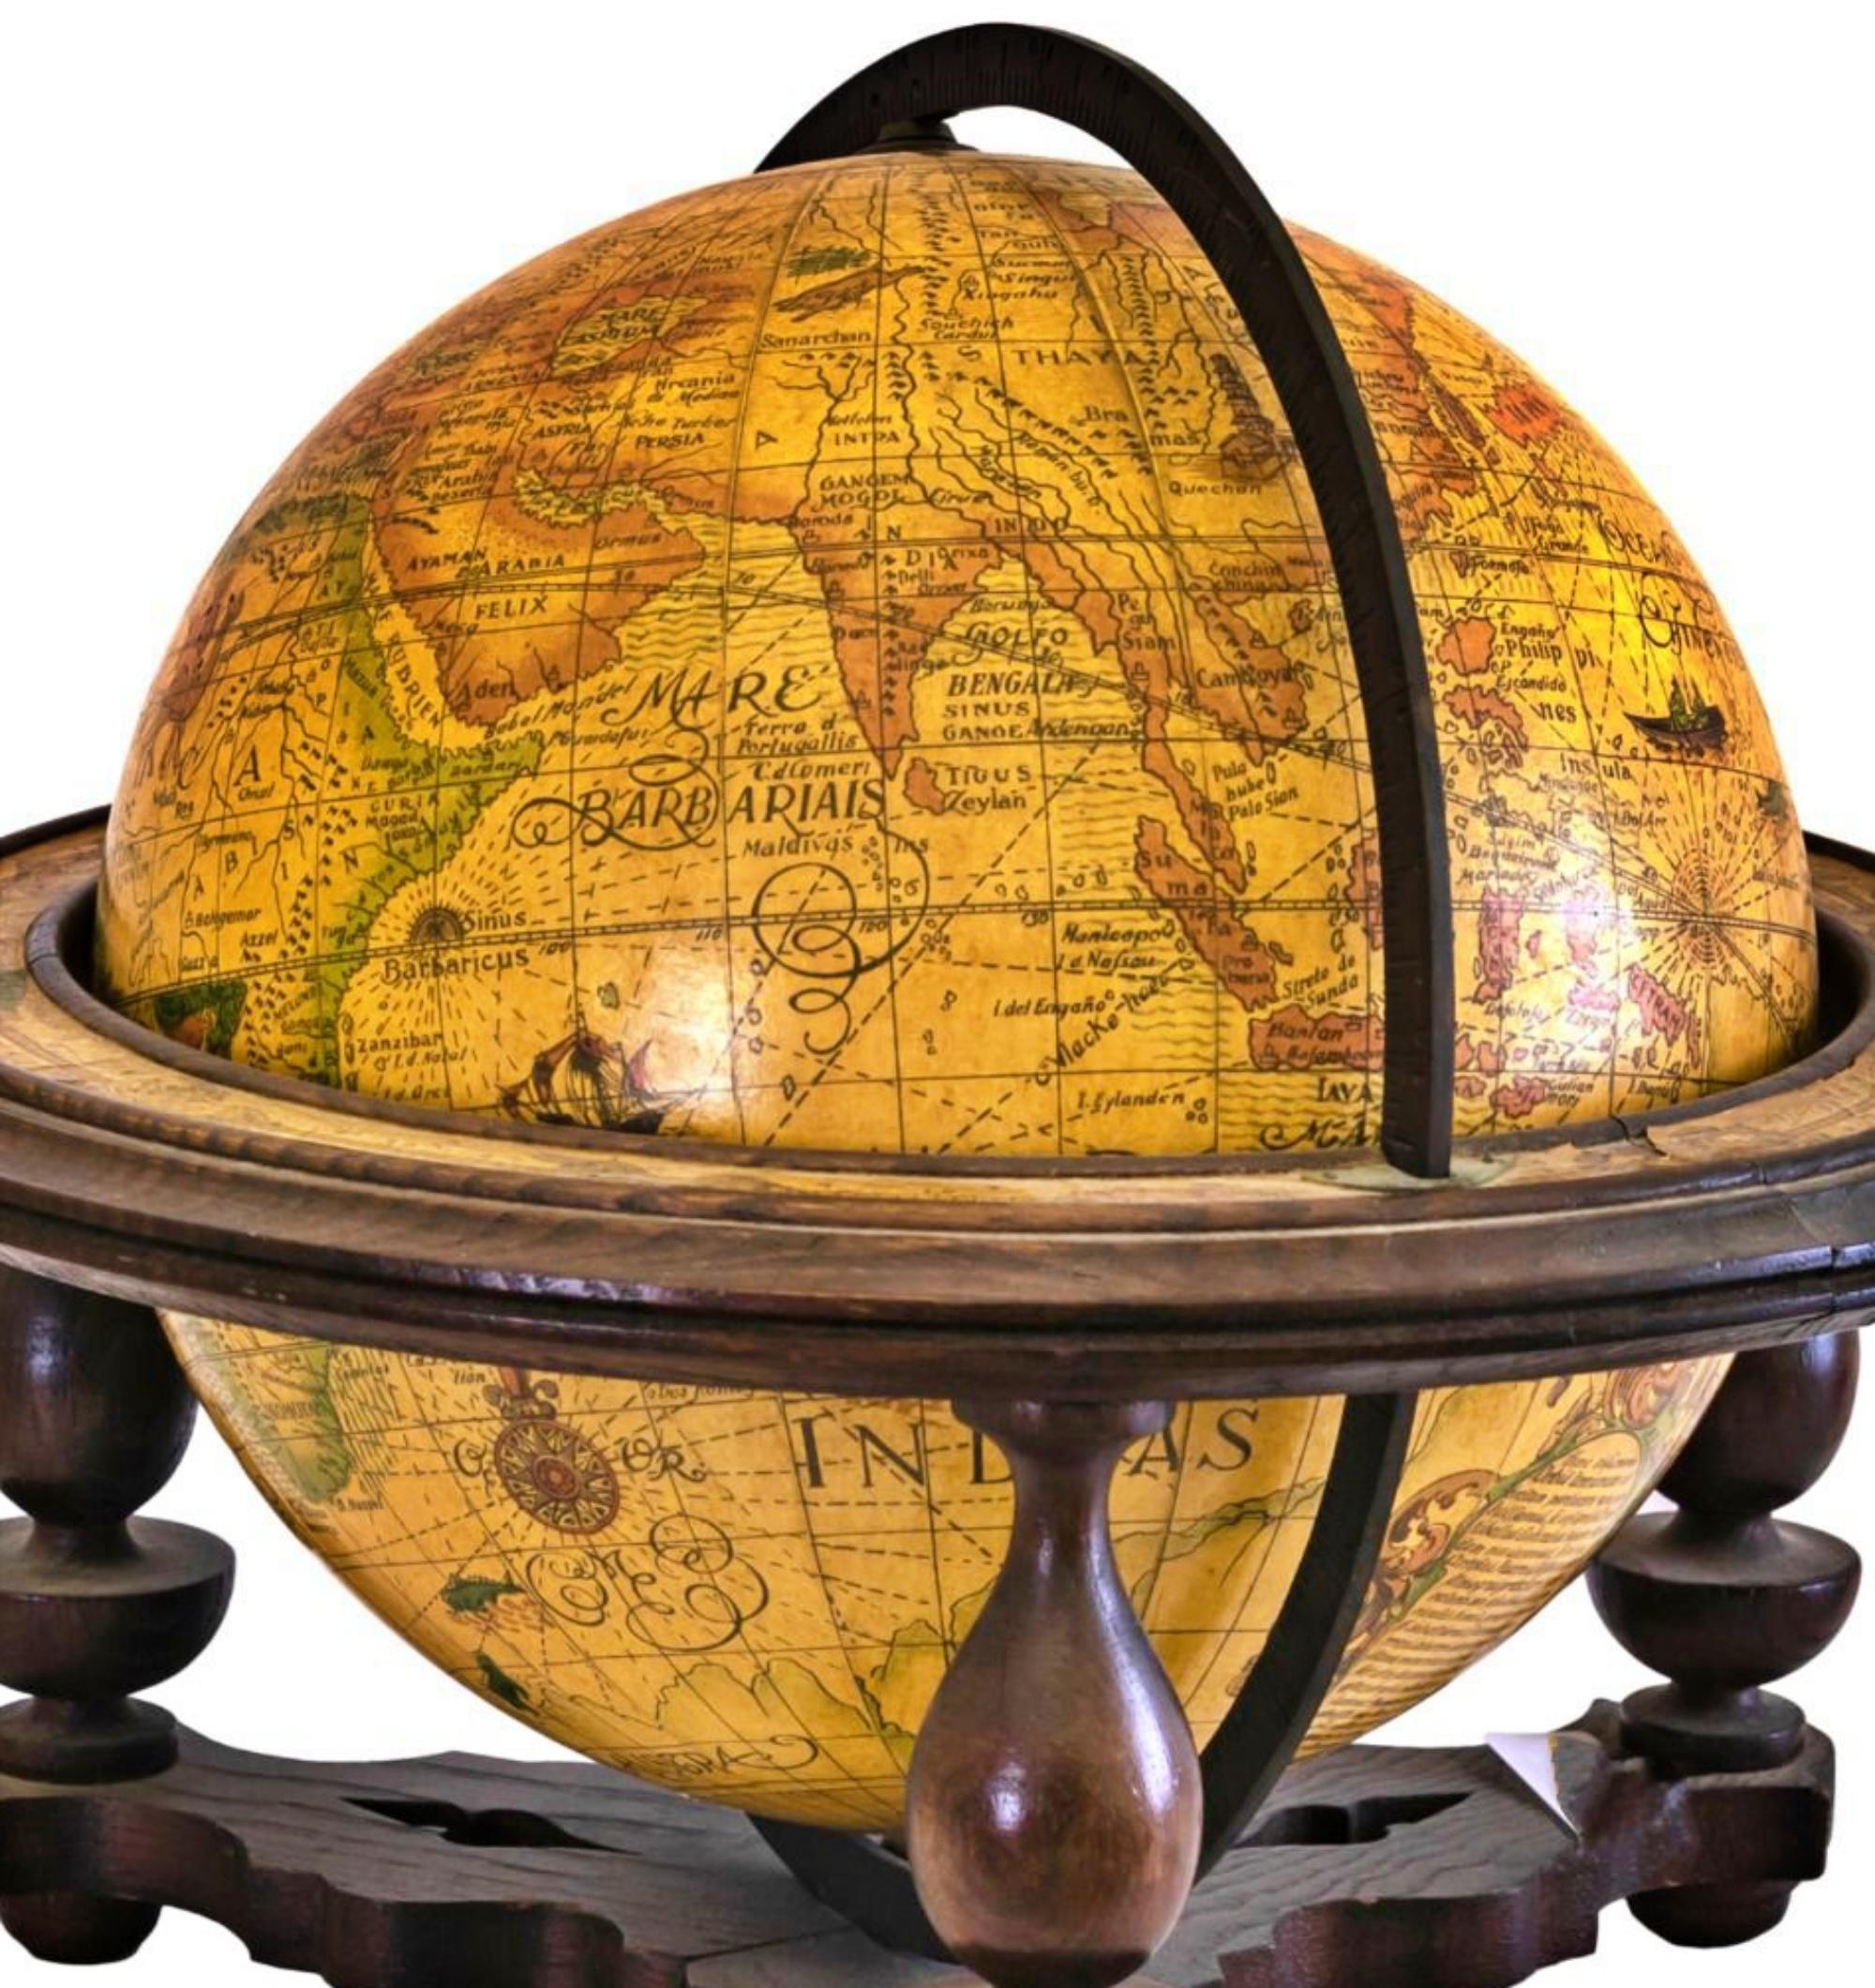 Modern Spanish Tabletop Globe with Turned Wood Support, Early 20th Century